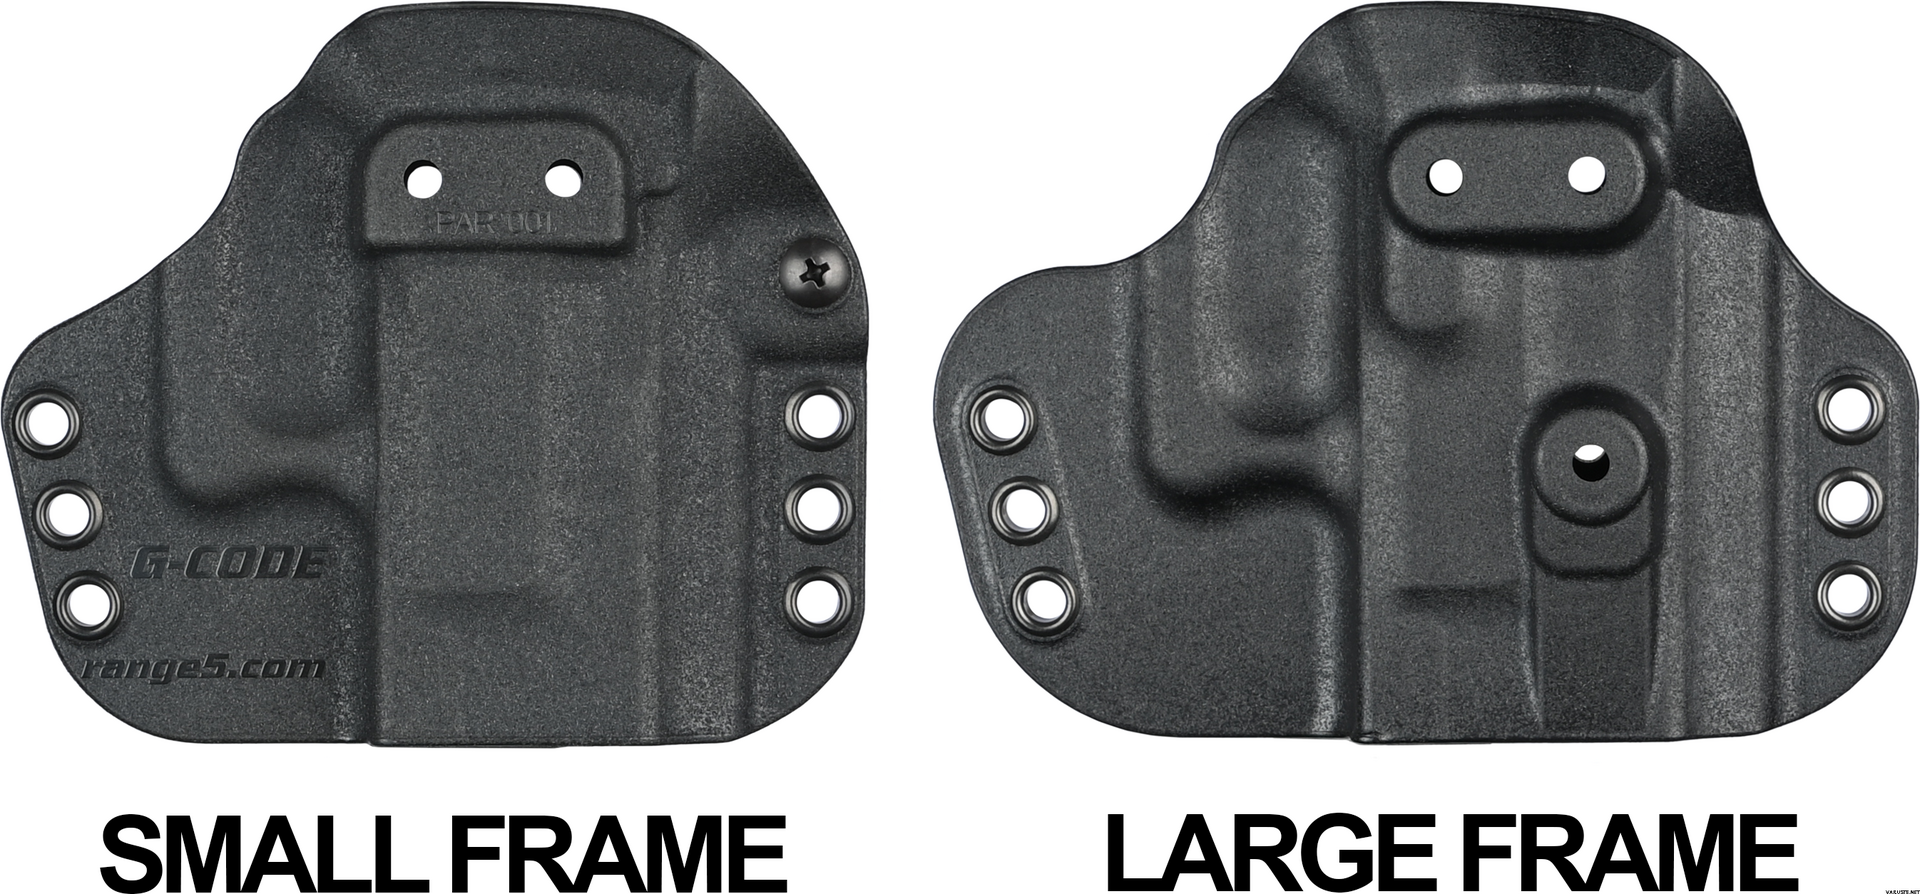 G-Code Paradigm Universal Fit Holster | Law Enforcement Pistol holsters ...